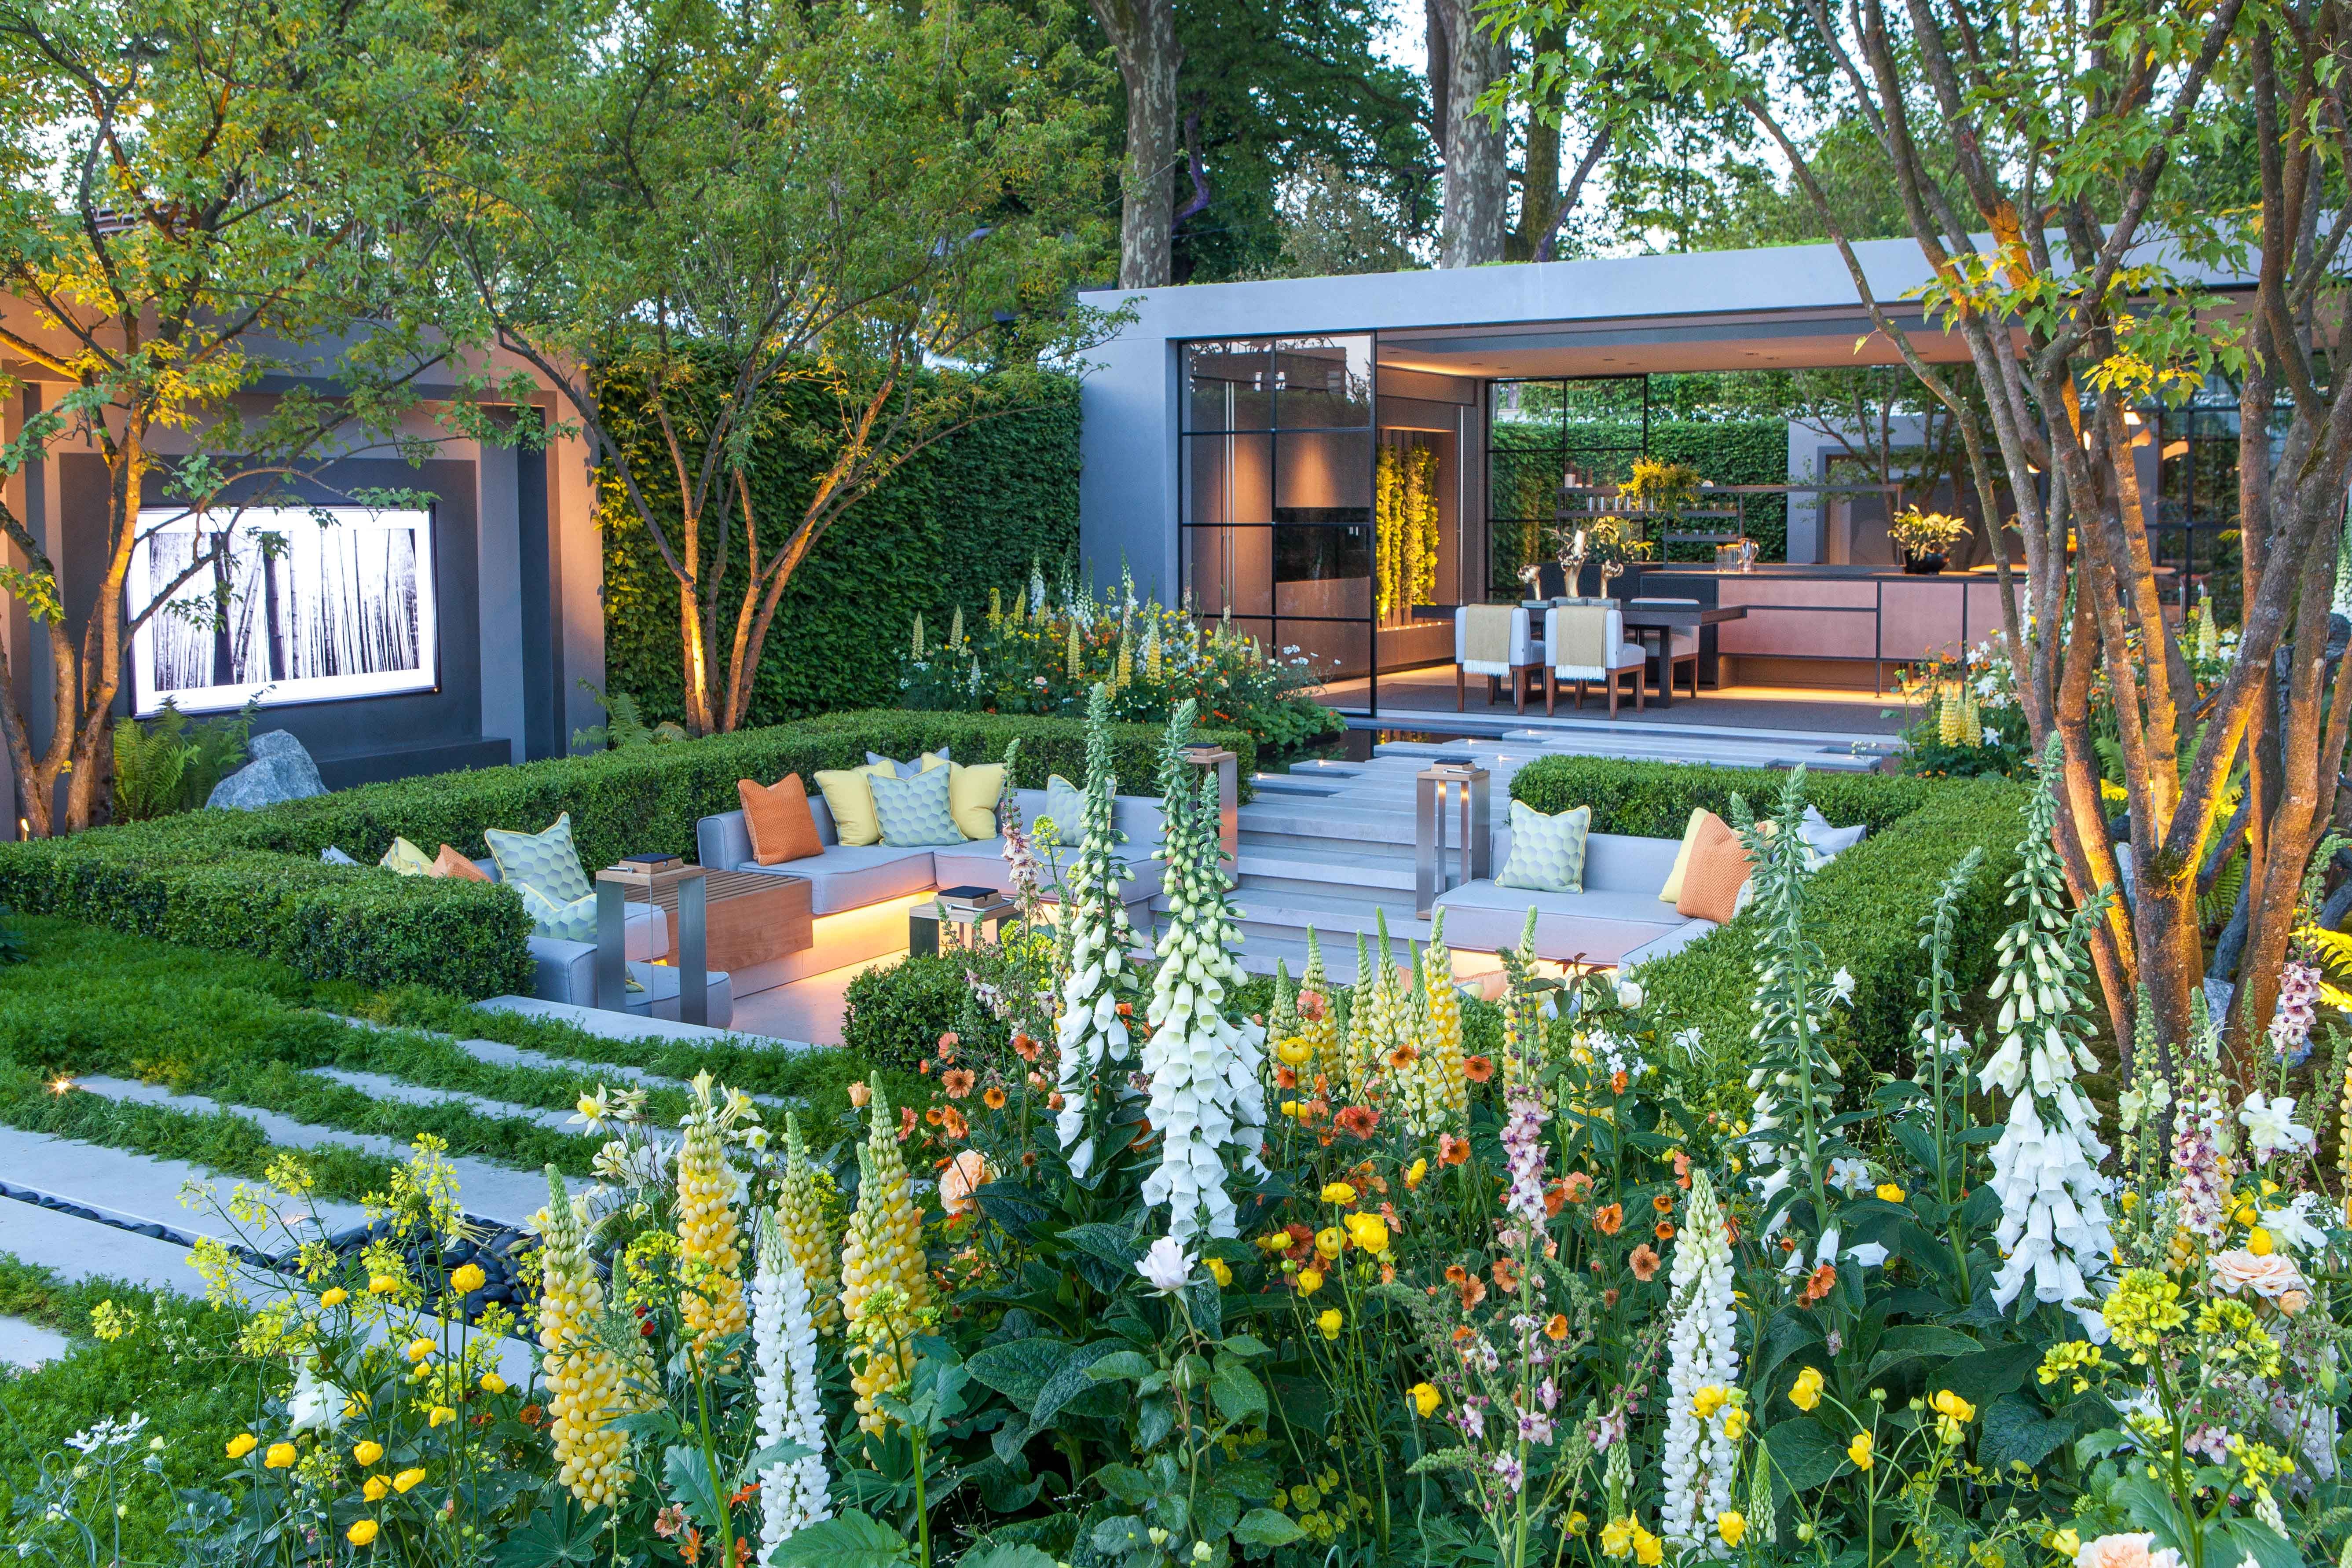 chelsea flower show - eco-city garden aims to reduce pollution